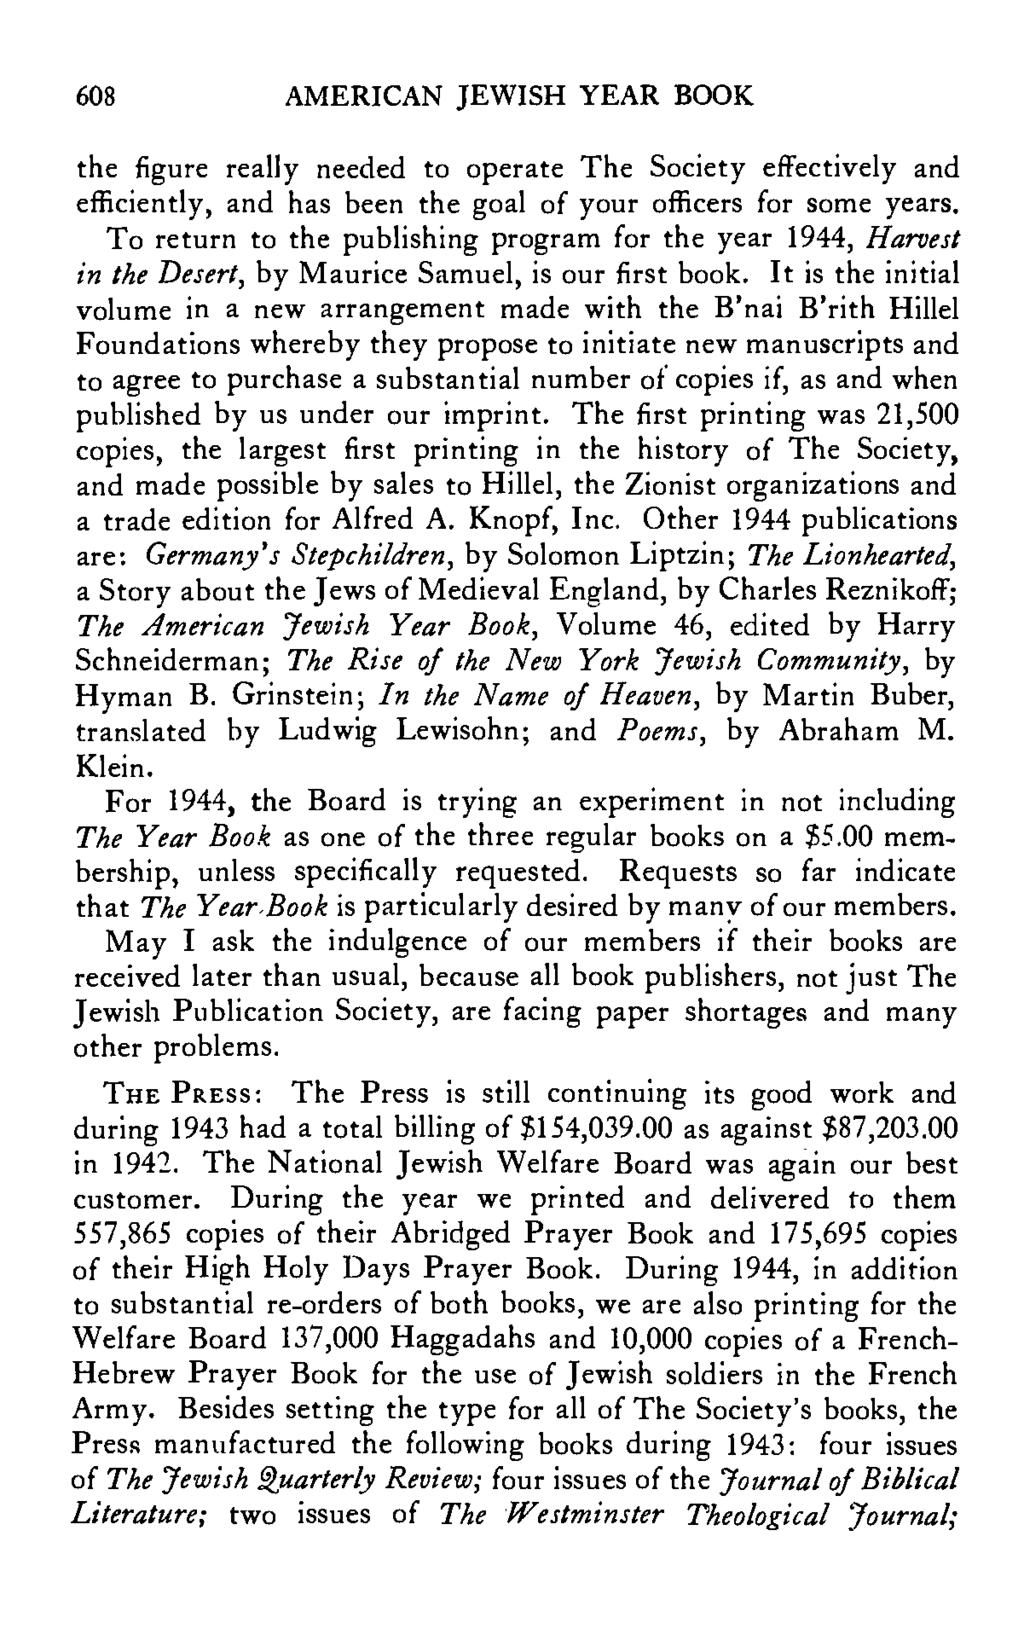 608 AMERICAN JEWISH YEAR BOOK the figure really needed to operate The Society effectively and efficiently, and has been the goal of your officers for some years.